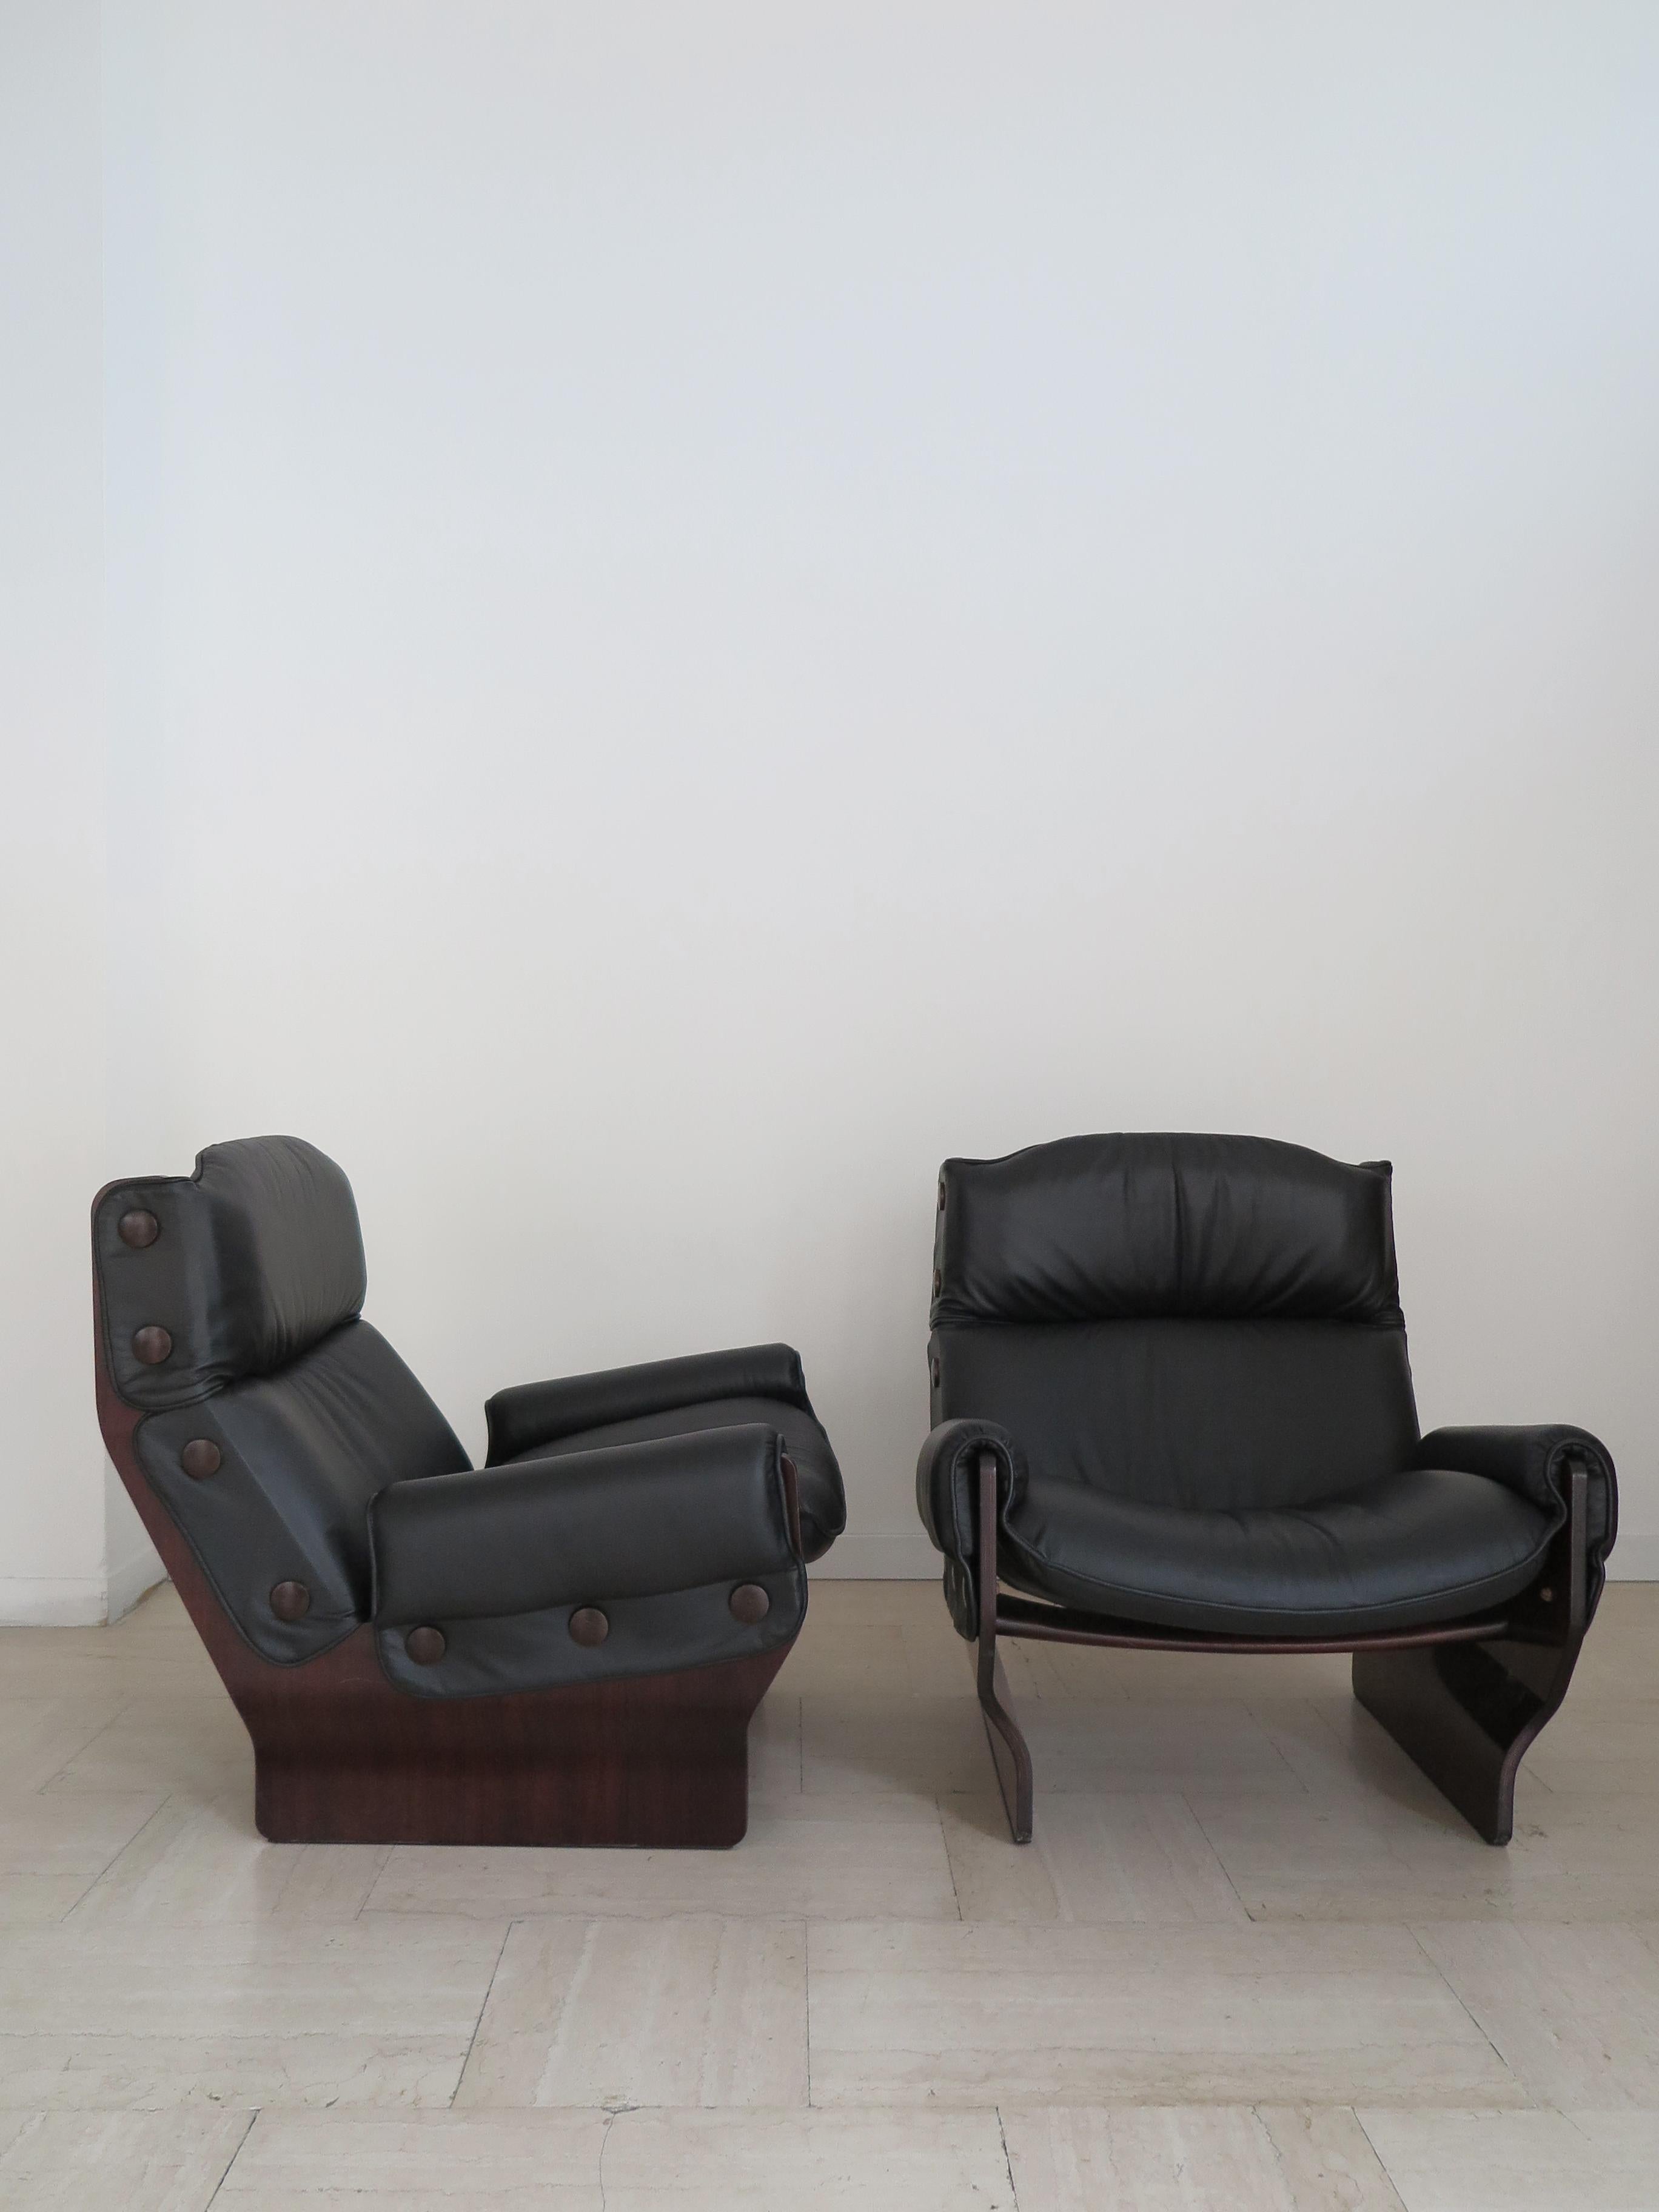 Italian midcentury modern design set of two armchairs model P110 Canada designed by Osvaldo Borsani and produced by Tecno,
bearing frame of curved wood to which seat and backrest are attached, upholstered in new black leather, secured with large